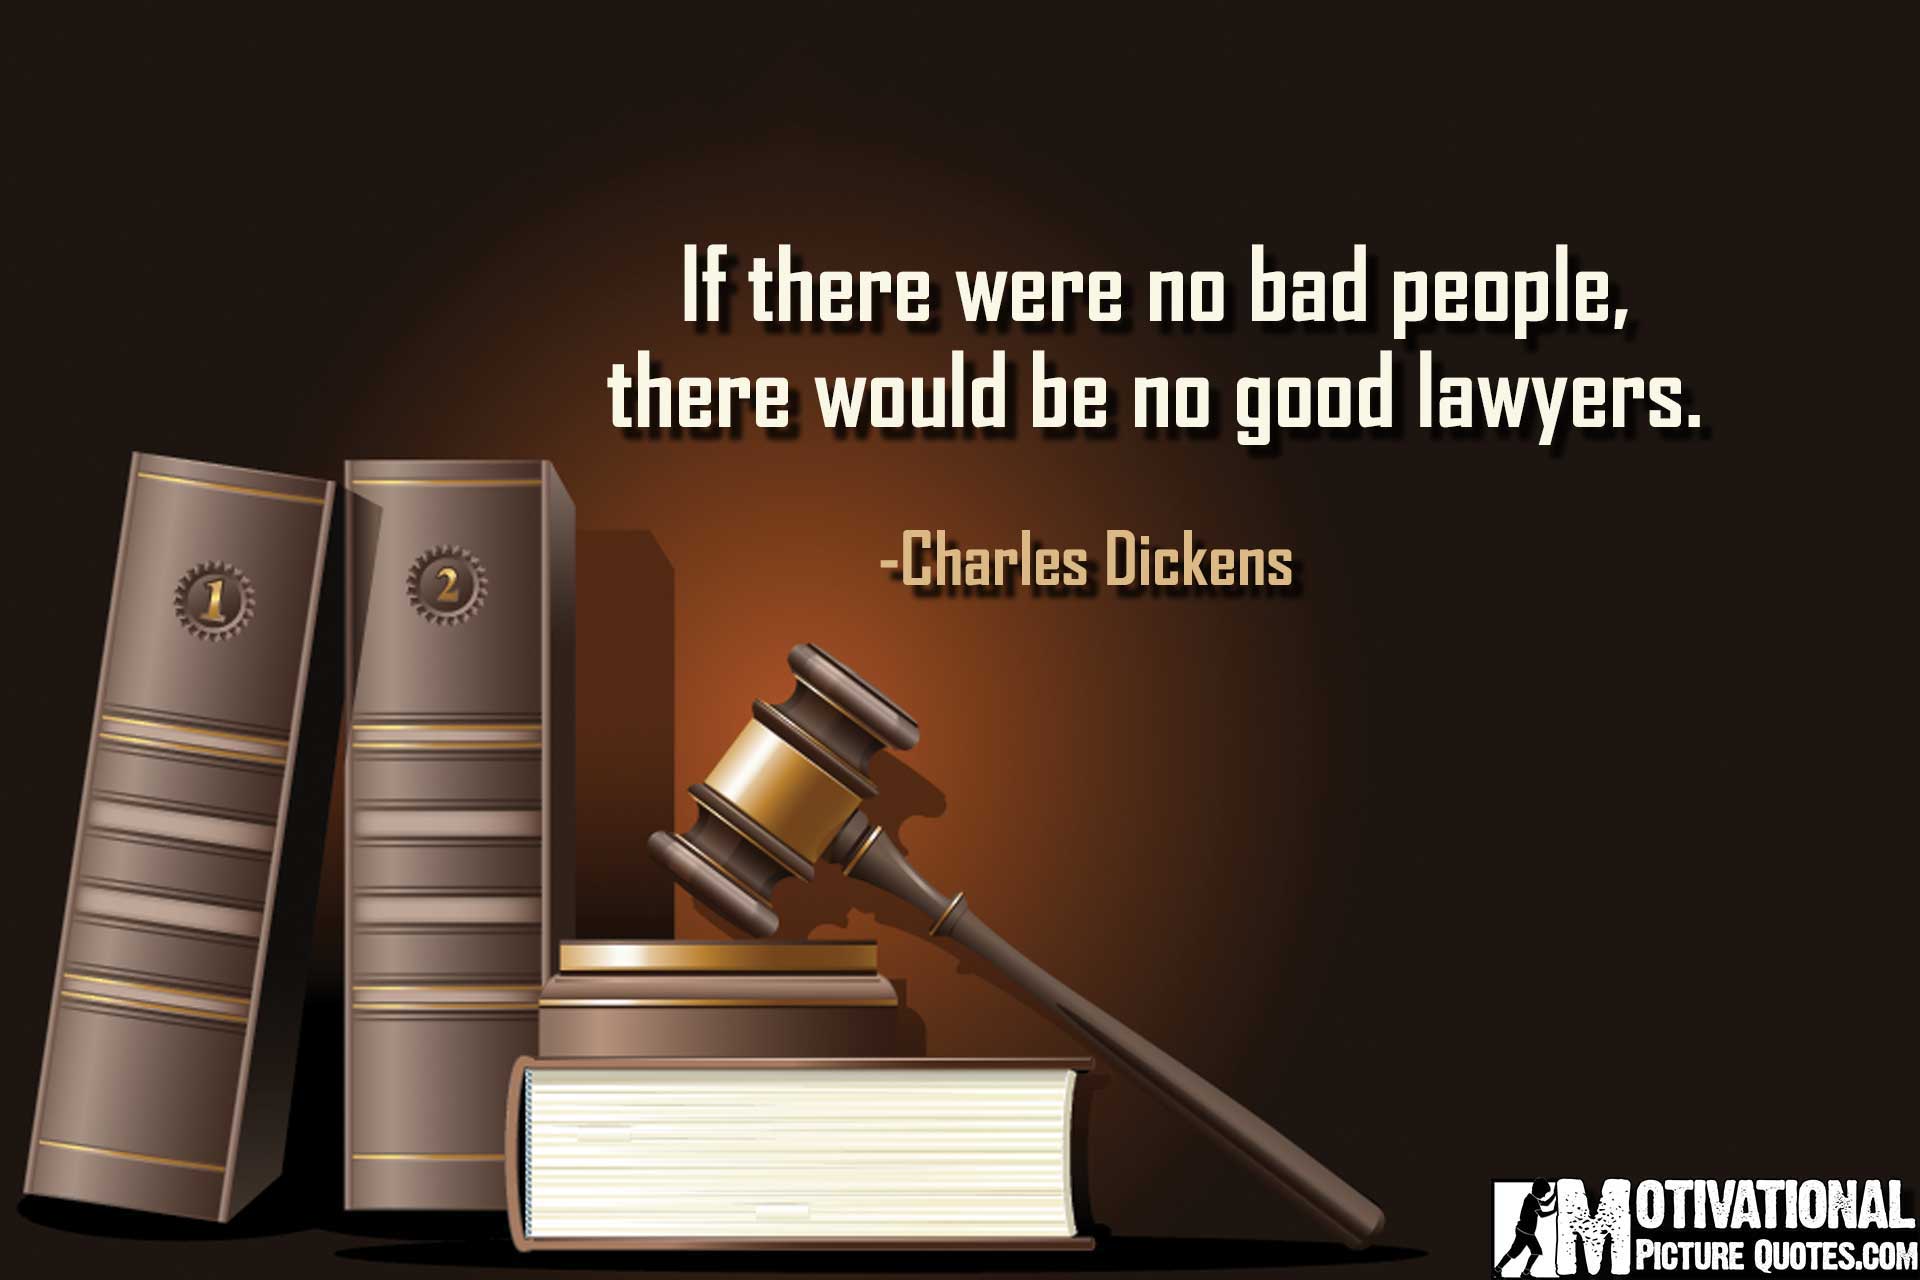 famous lawyer quotes by Charles Dickens